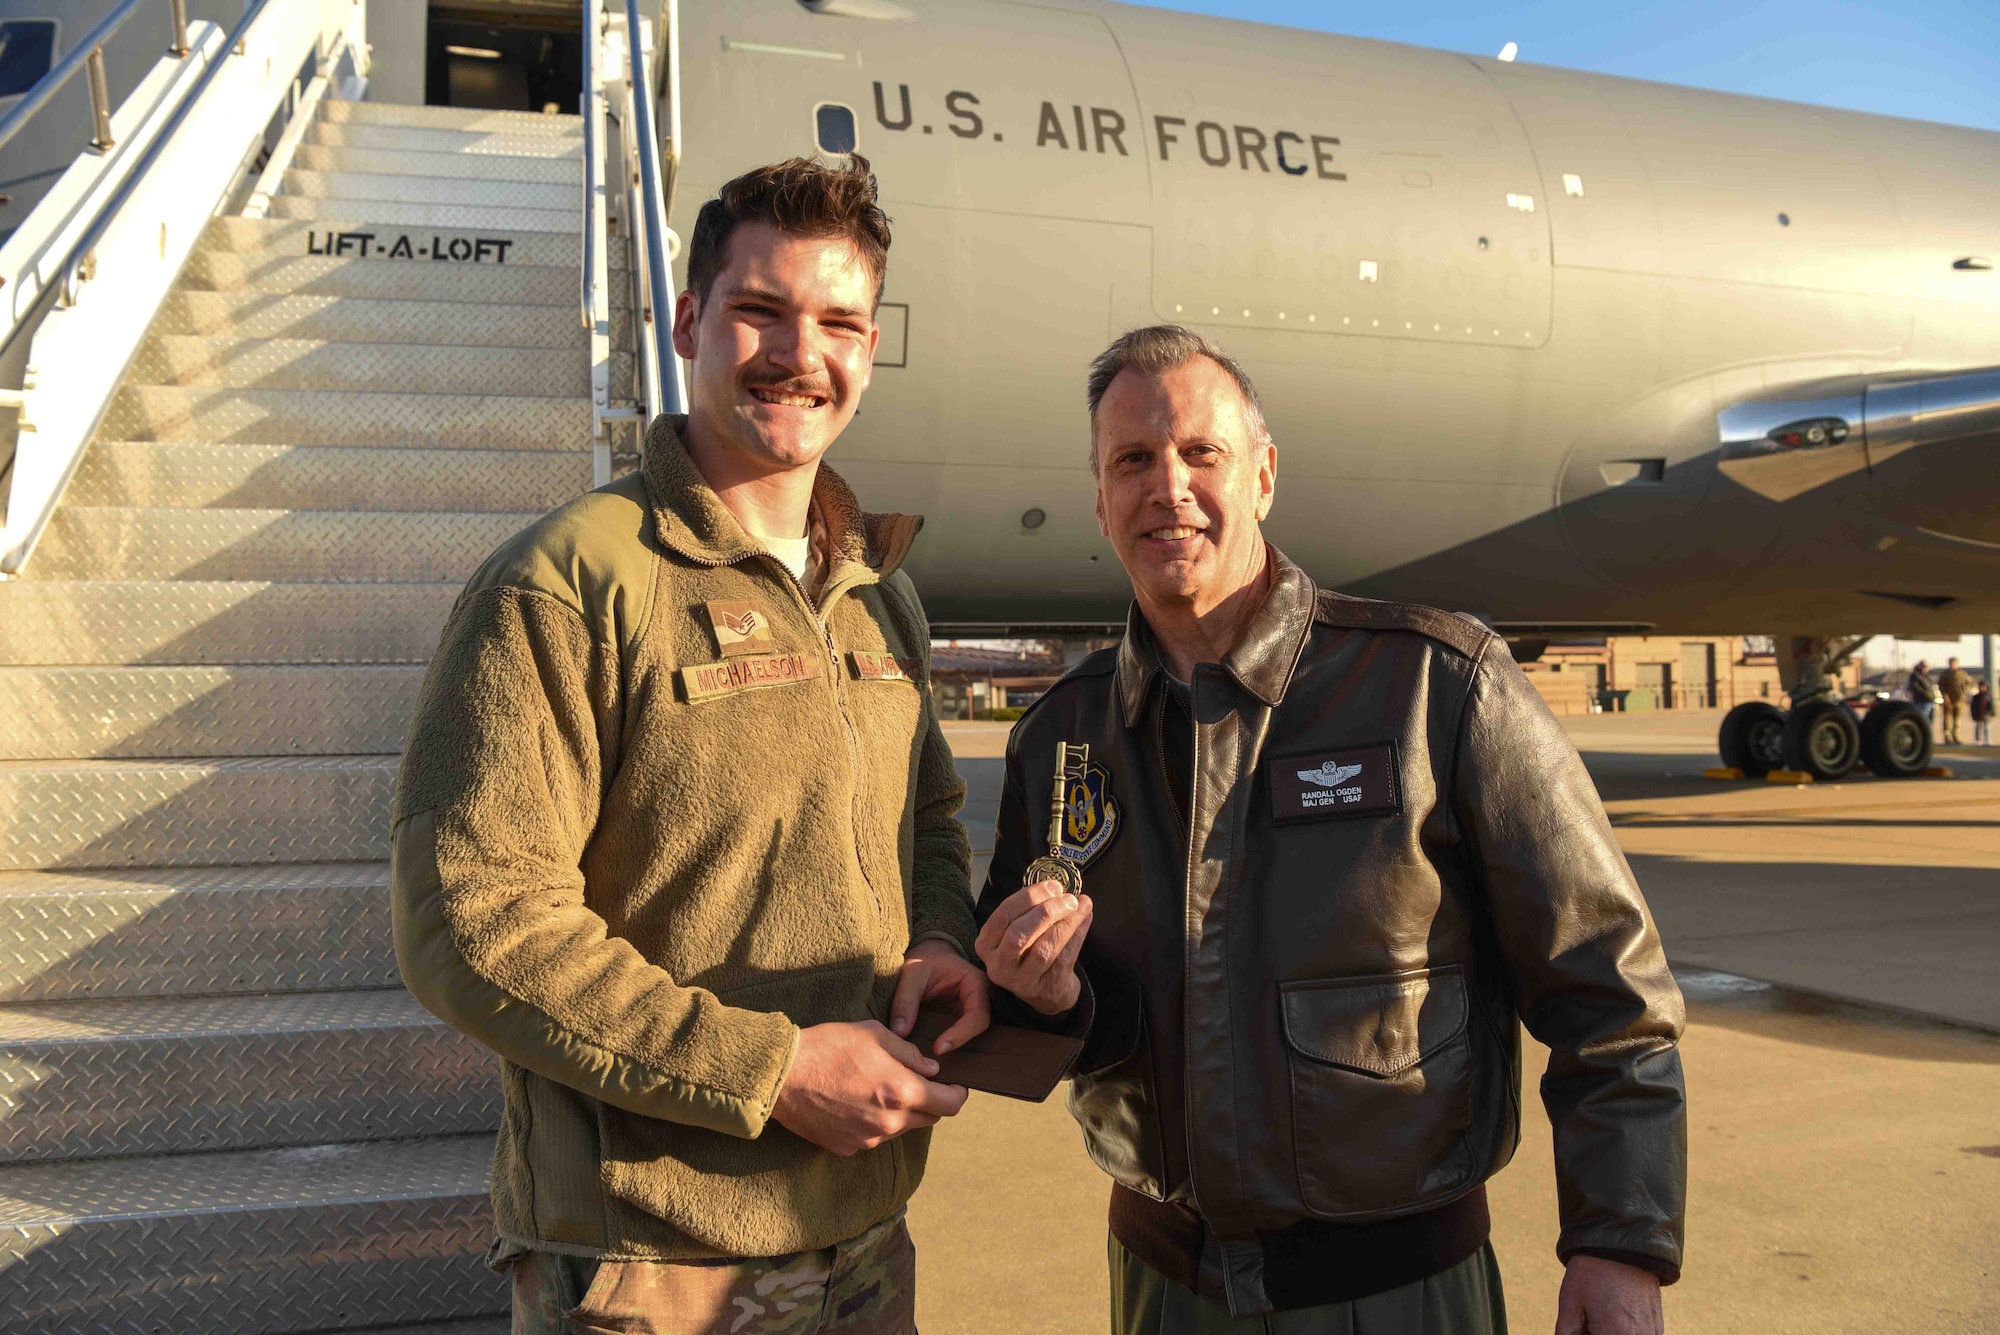 Staff Sgt. Ian Michaelson, 931st Aircraft Maintenance Squadron crew chief, hands Maj. Gen. Randall A. Ogden, 4th Air Force commander, the key of the aircraft, Dec. 20, 2019, at McConnell Air Force Base, Kan. The installation will be receiving 36 total KC-46A Pegasus aircraft. (U.S. Air Force photo by Airman 1st Class Alexi Bosarge)